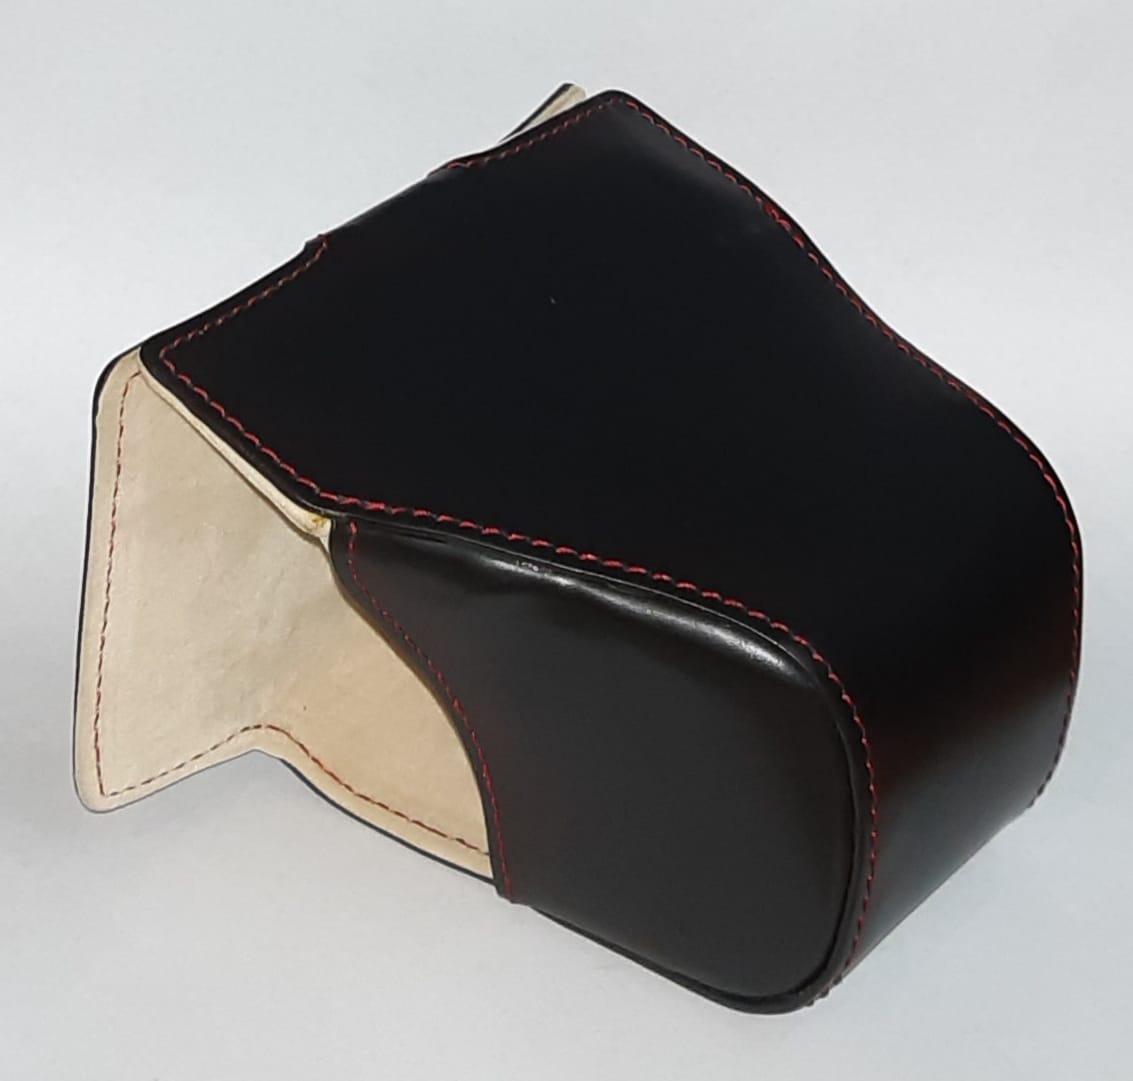 :::USED::: KAZA LEATHER CASE BLACK (EXCELLENT) - CONSIGNMENT